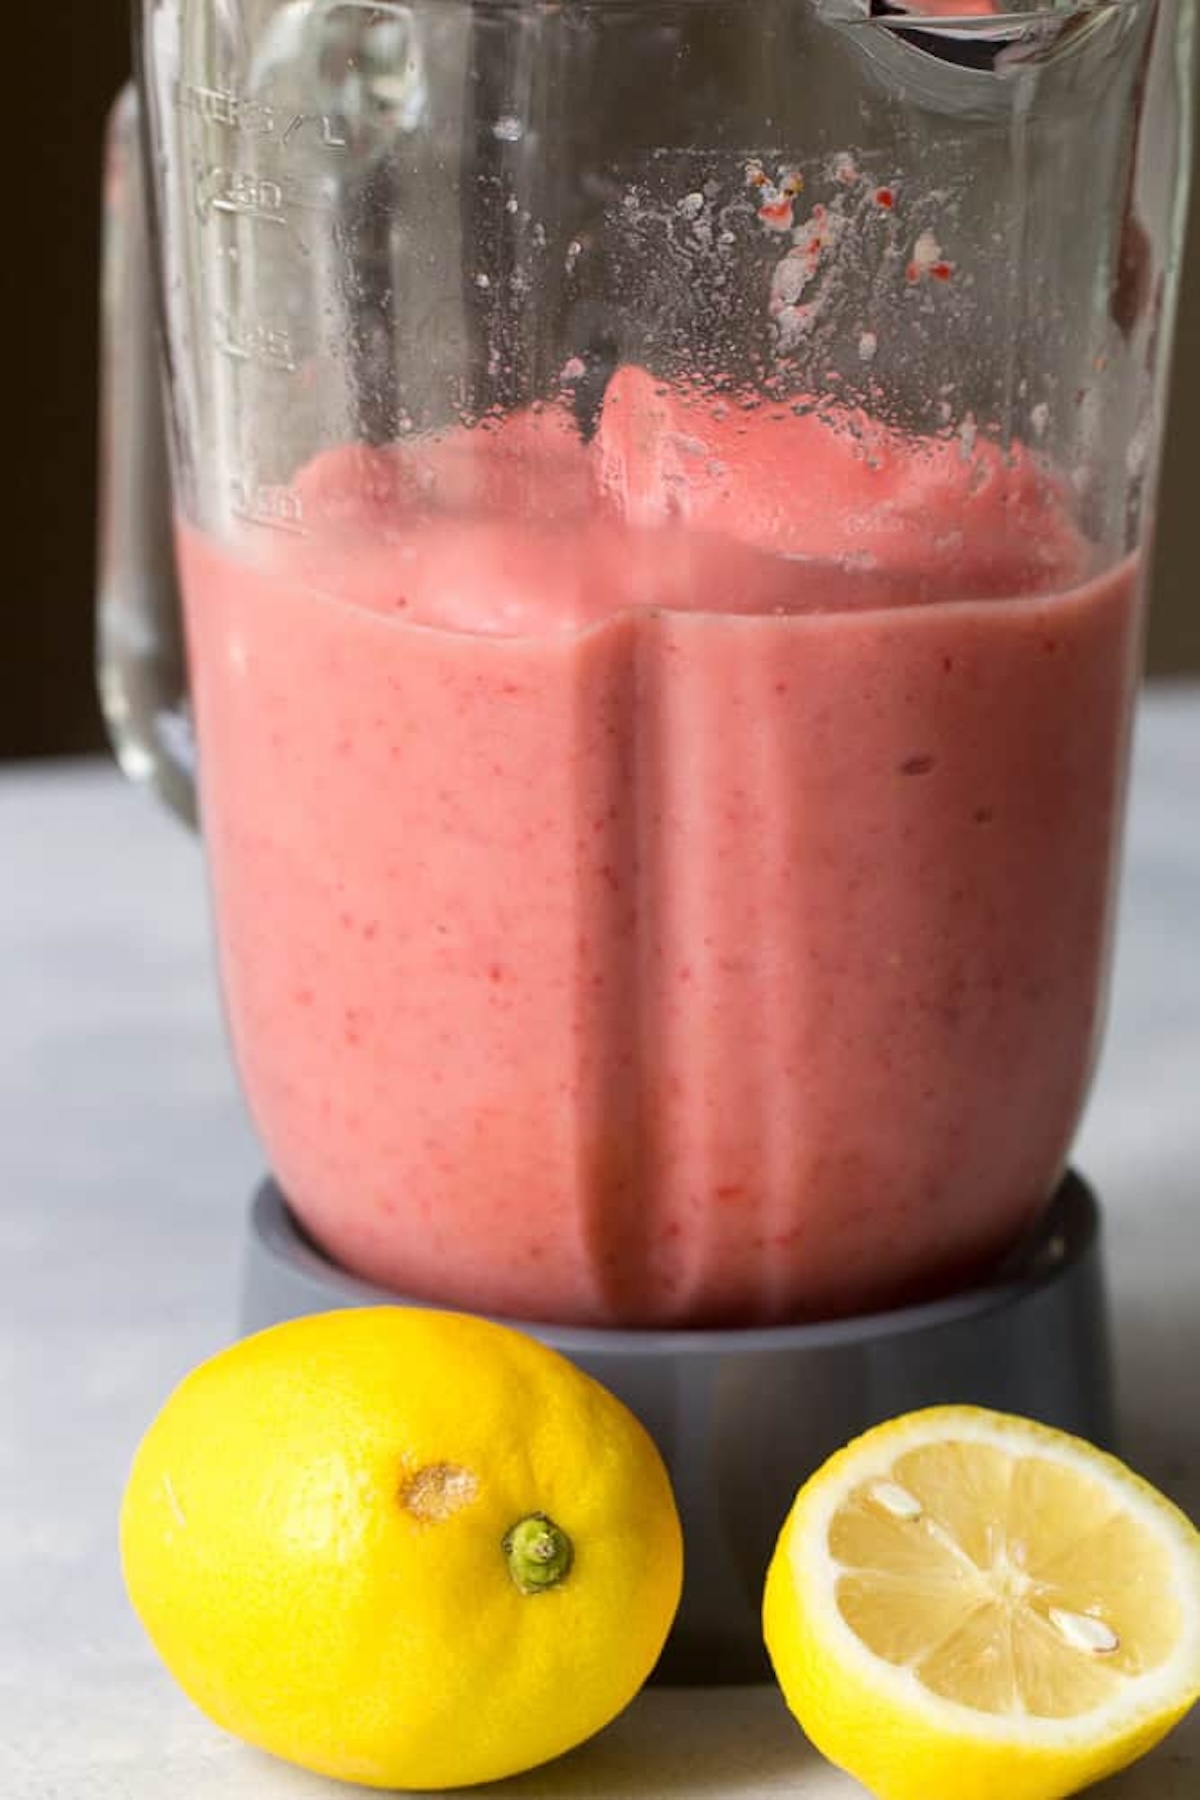 A blender containing pink strawberry smoothie mixture next to one whole lemon and one halved lemon on a surface.